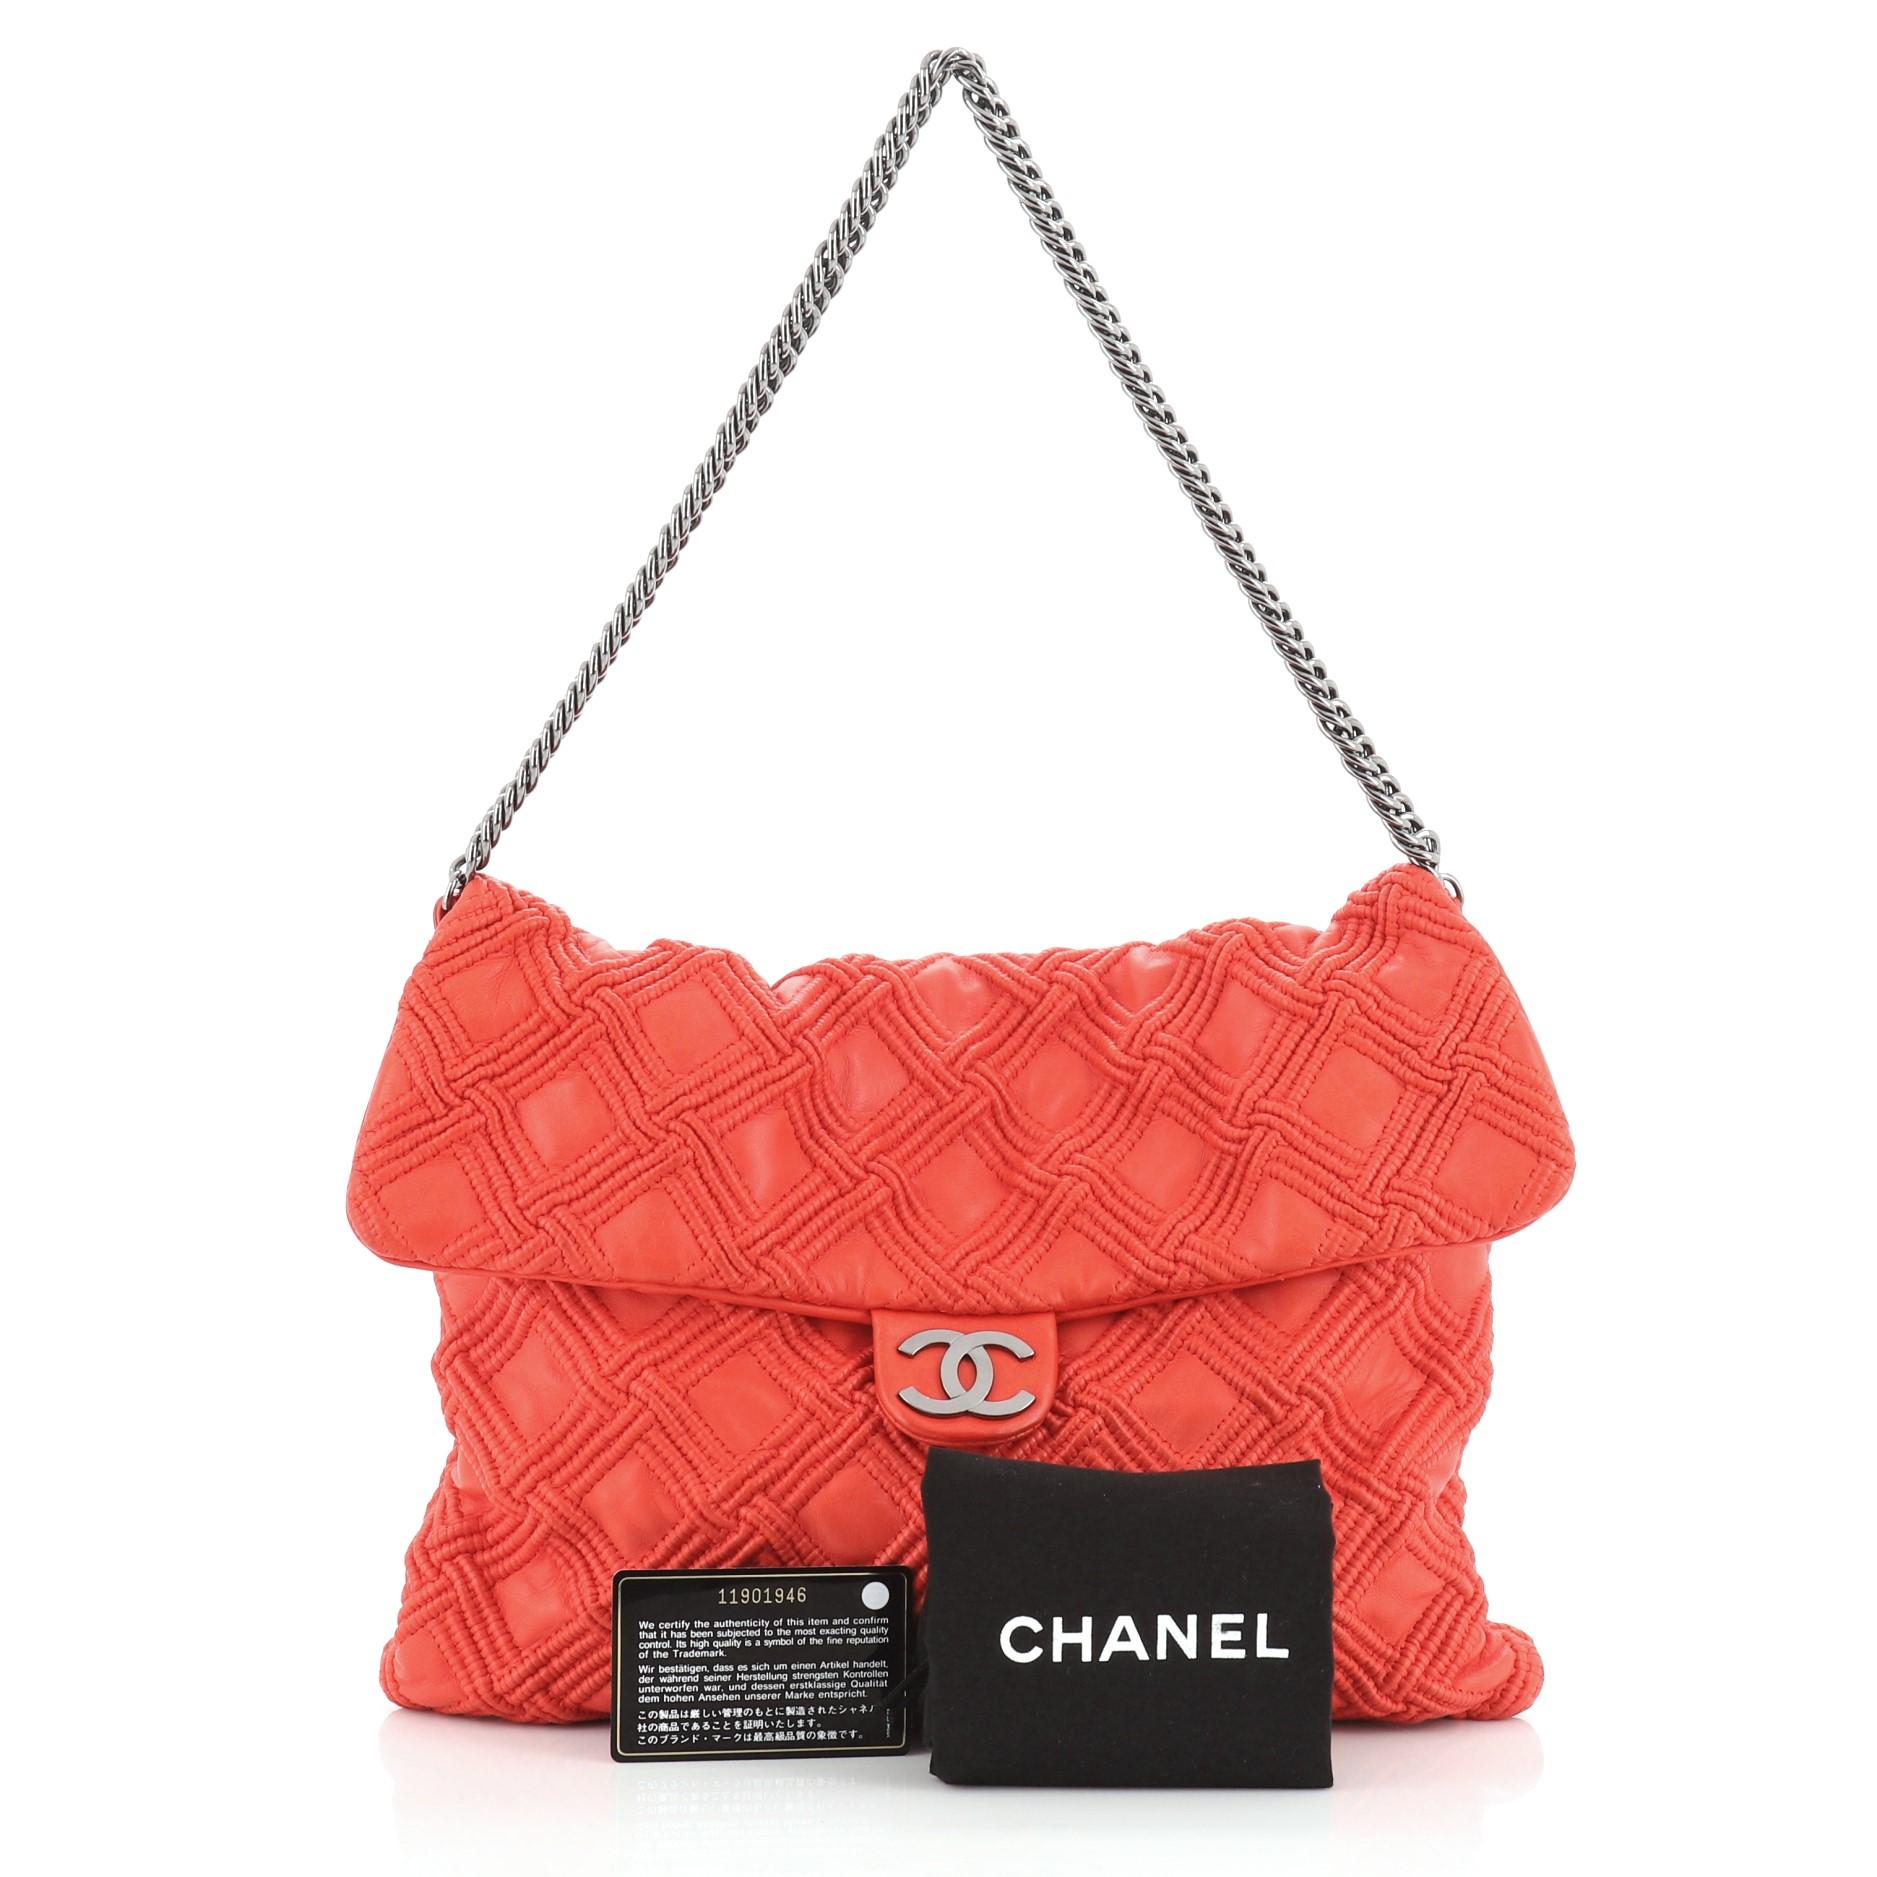 This Chanel Walk of Fame Flap Bag Stitched Lambskin Large, crafted in red smocked stitch quilted lambskin leather, features bijoux chain strap, metal CC logo and gunmetal-tone hardware. Its magnetic snap button closure opens to a grey fabric